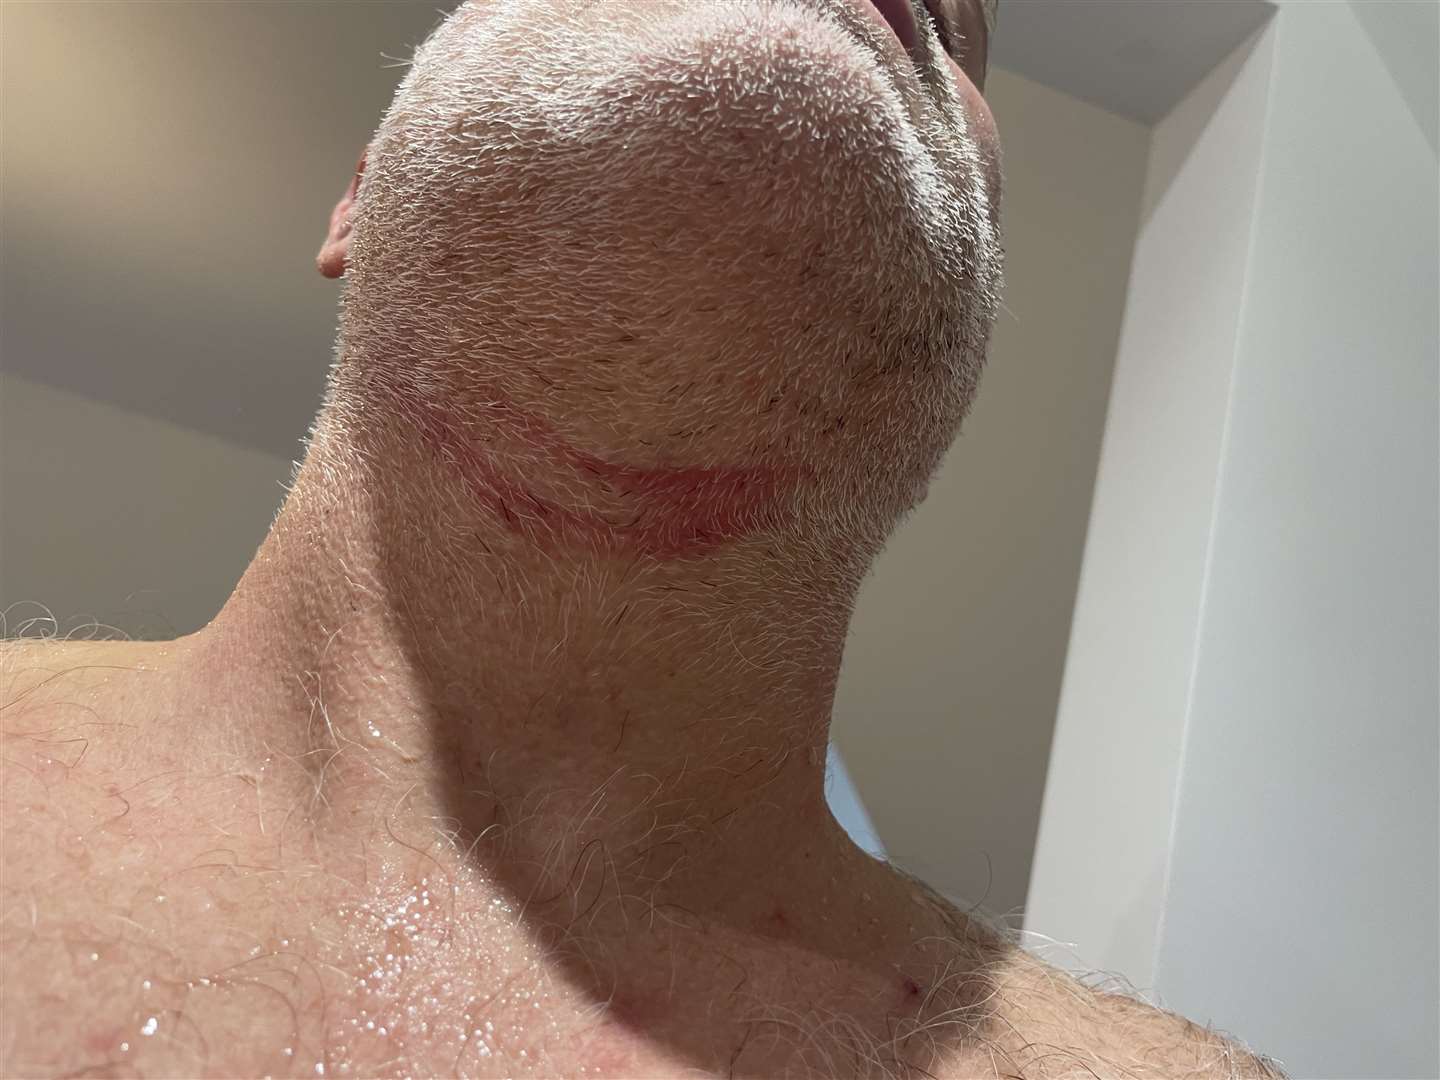 Keith Patrick's injuries to his neck after the road rage attack in Birchington. Picture: Keith Patrick